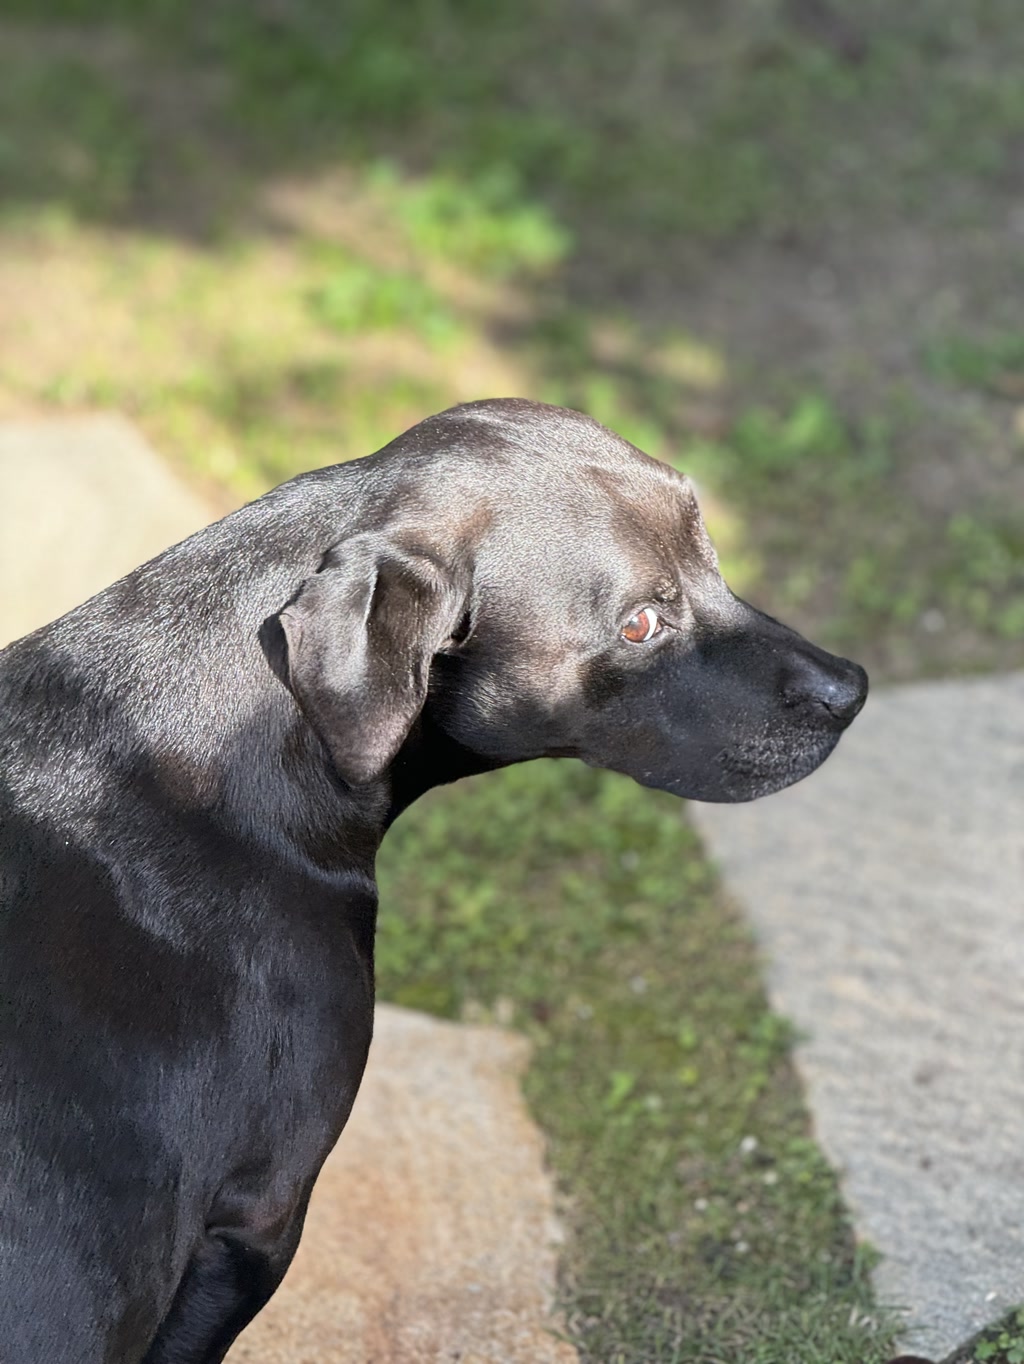 A profile view of a large black dog with sleek fur. The dog has a prominent forehead, a short snout, and erect ears that fold forward slightly at the top. It has alert, round eyes and appears to be looking off into the distance. The background suggests an outdoor setting with a concrete path and greenery. Sunlight filters through, casting soft light and shadows over the scene.